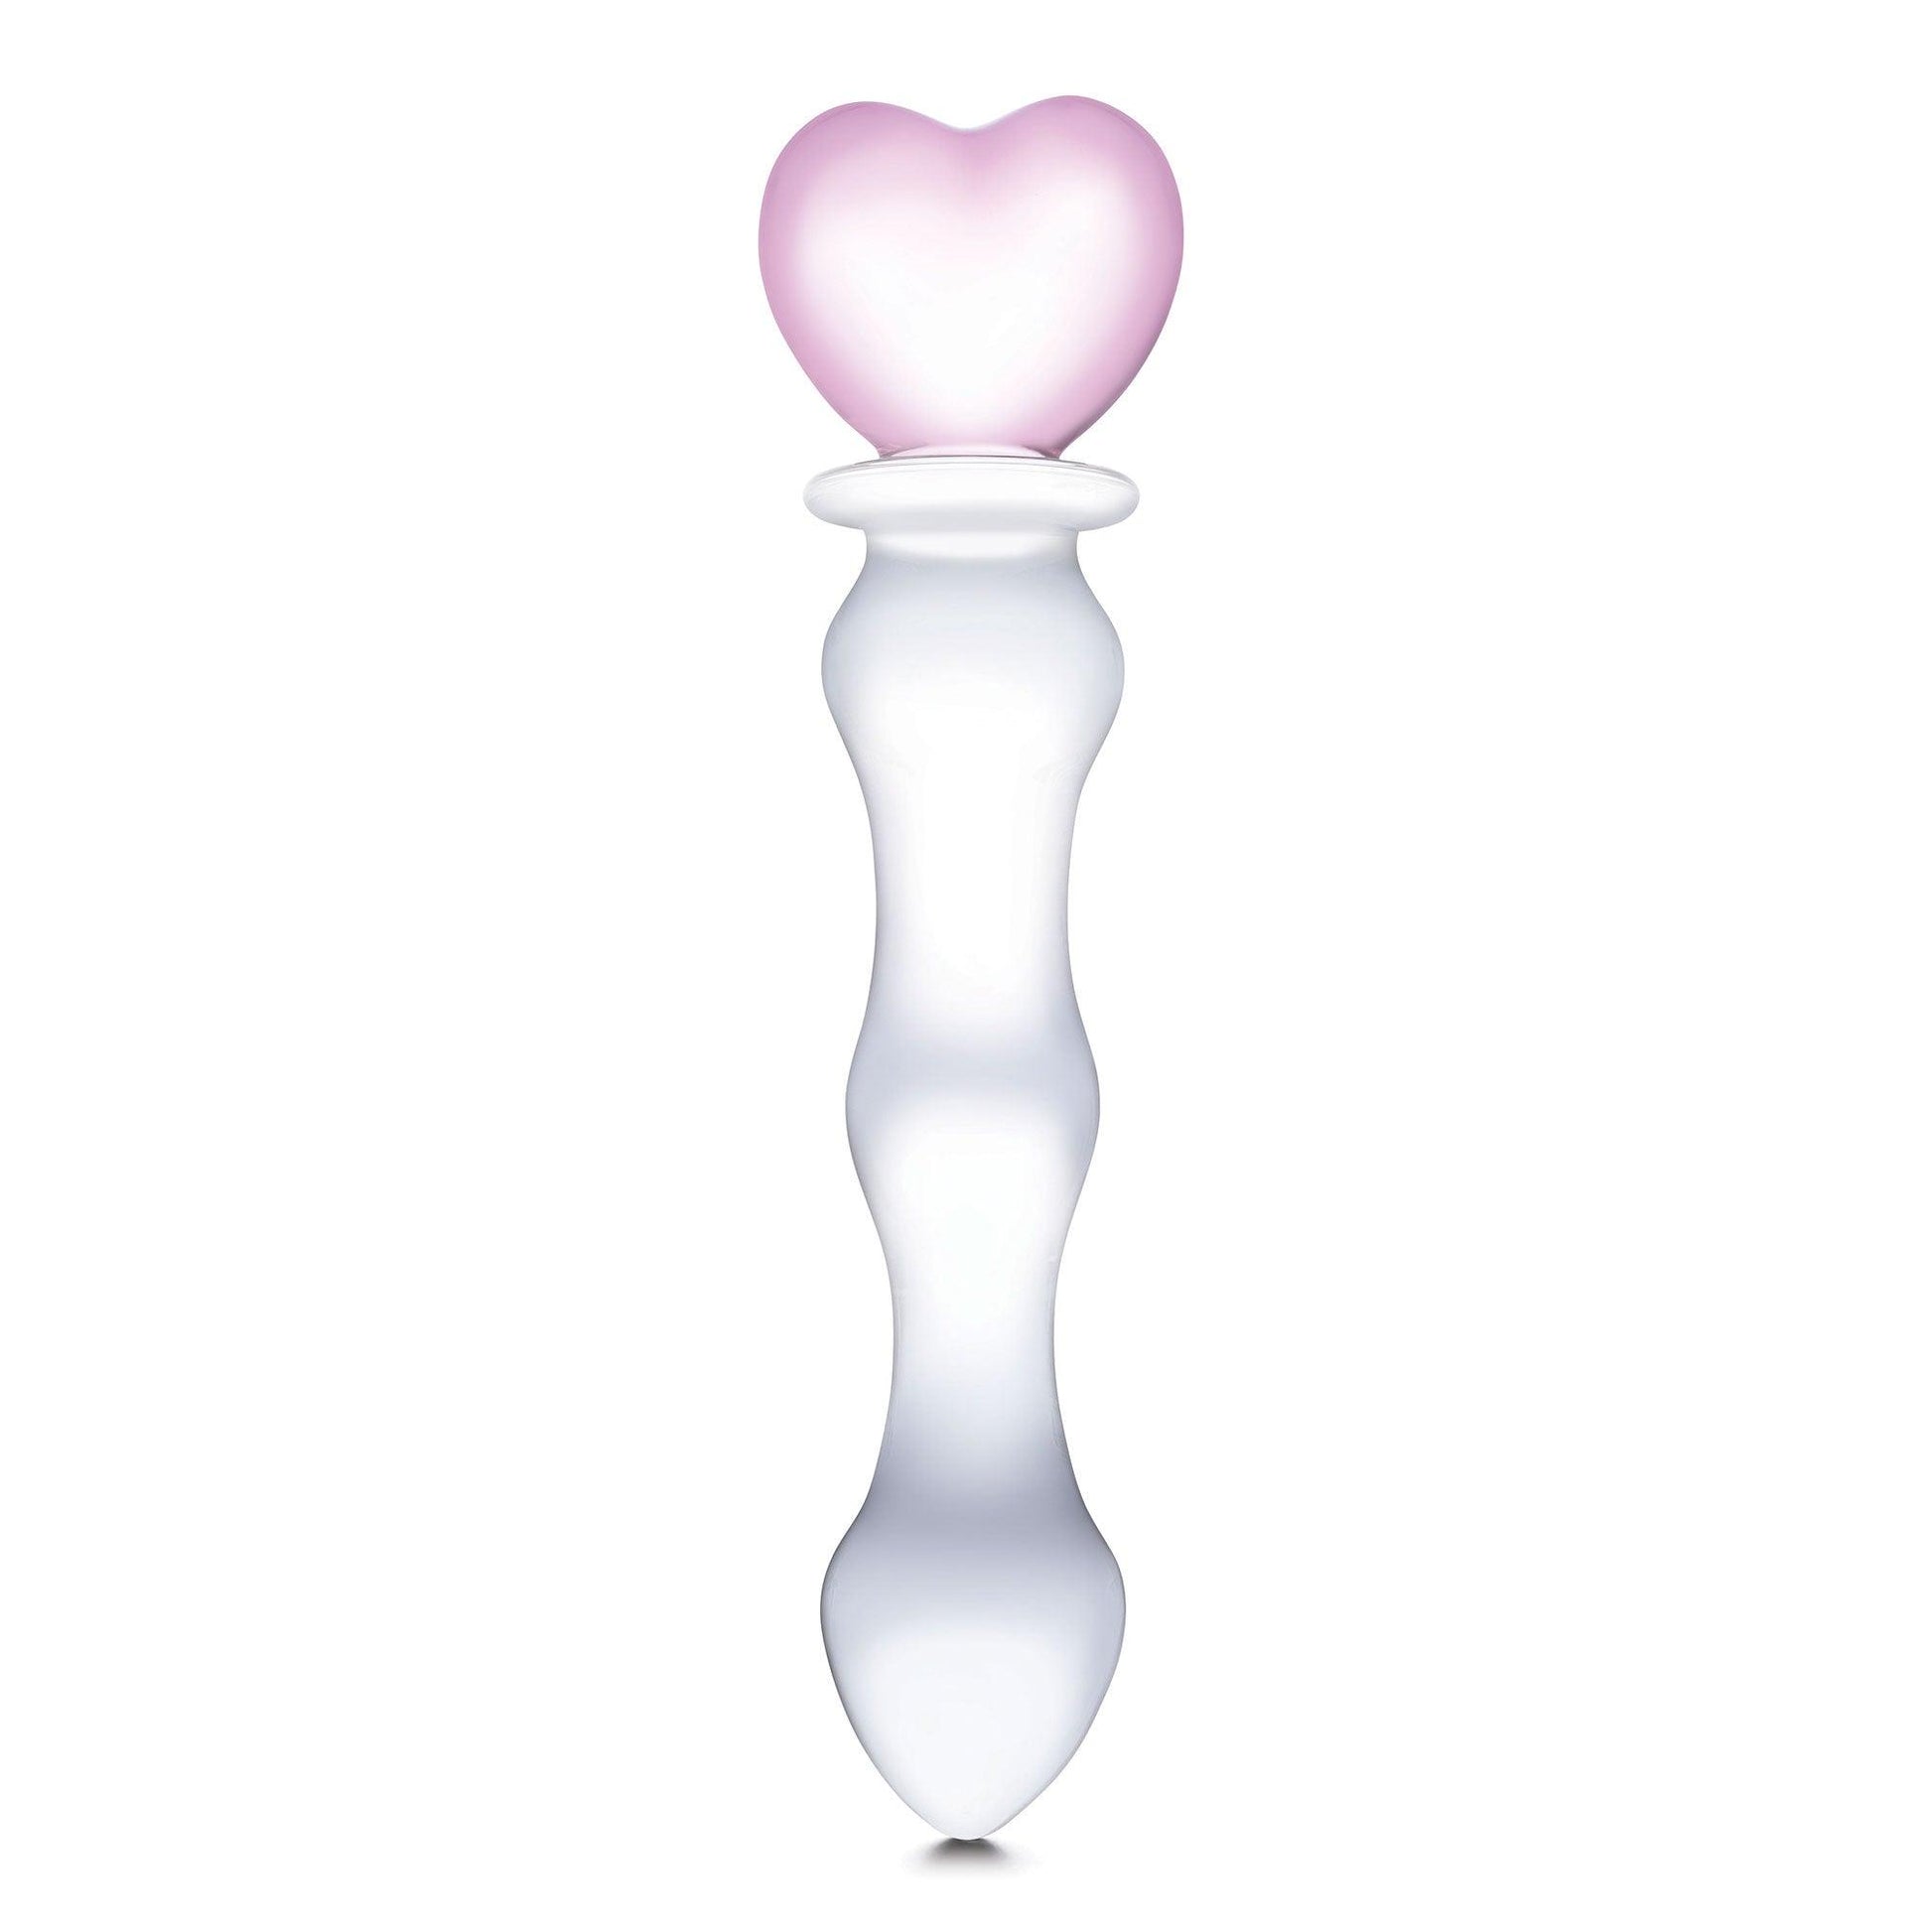 8 Inch Sweetheart Glass Dildo - Pink/clear - My Sex Toy Hub